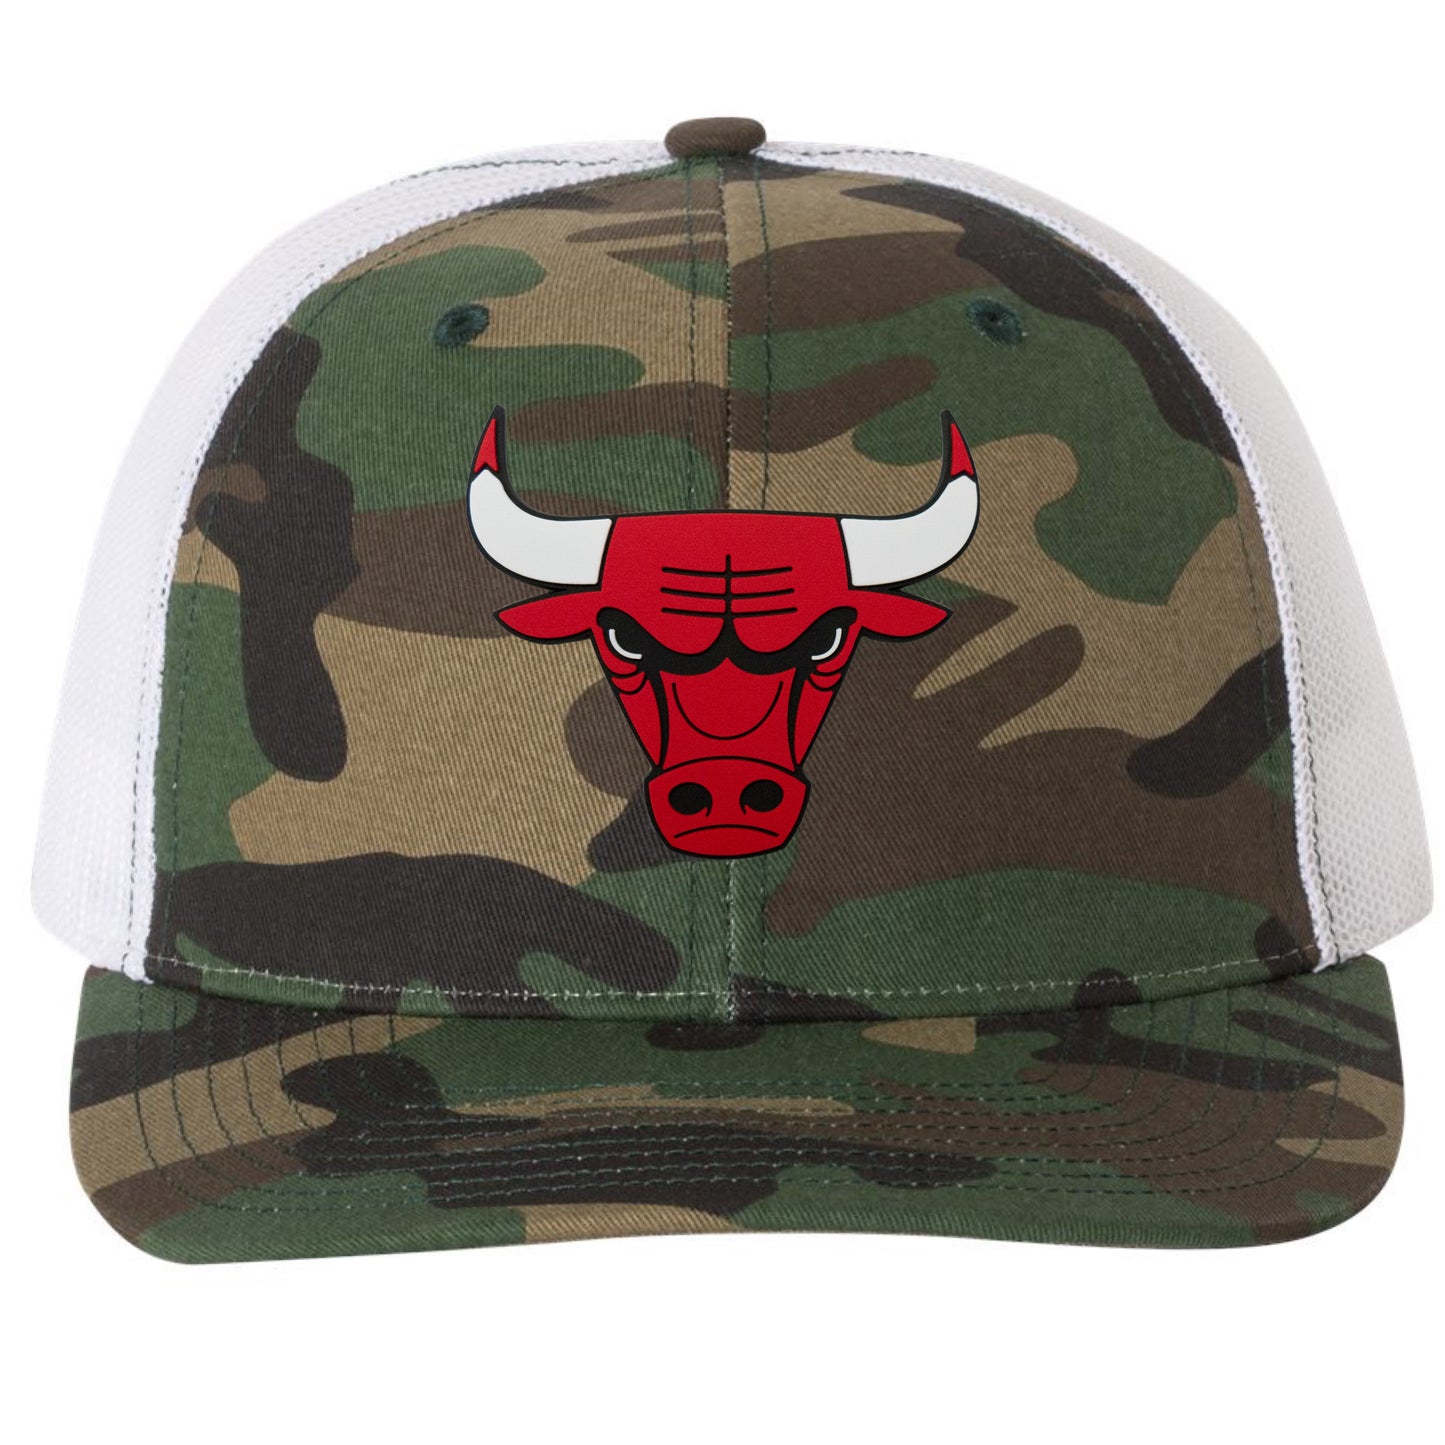 Chicago Bulls 3D Patterned Snapback Trucker Hat- Army Camo/ White - Ten Gallon Hat Co.